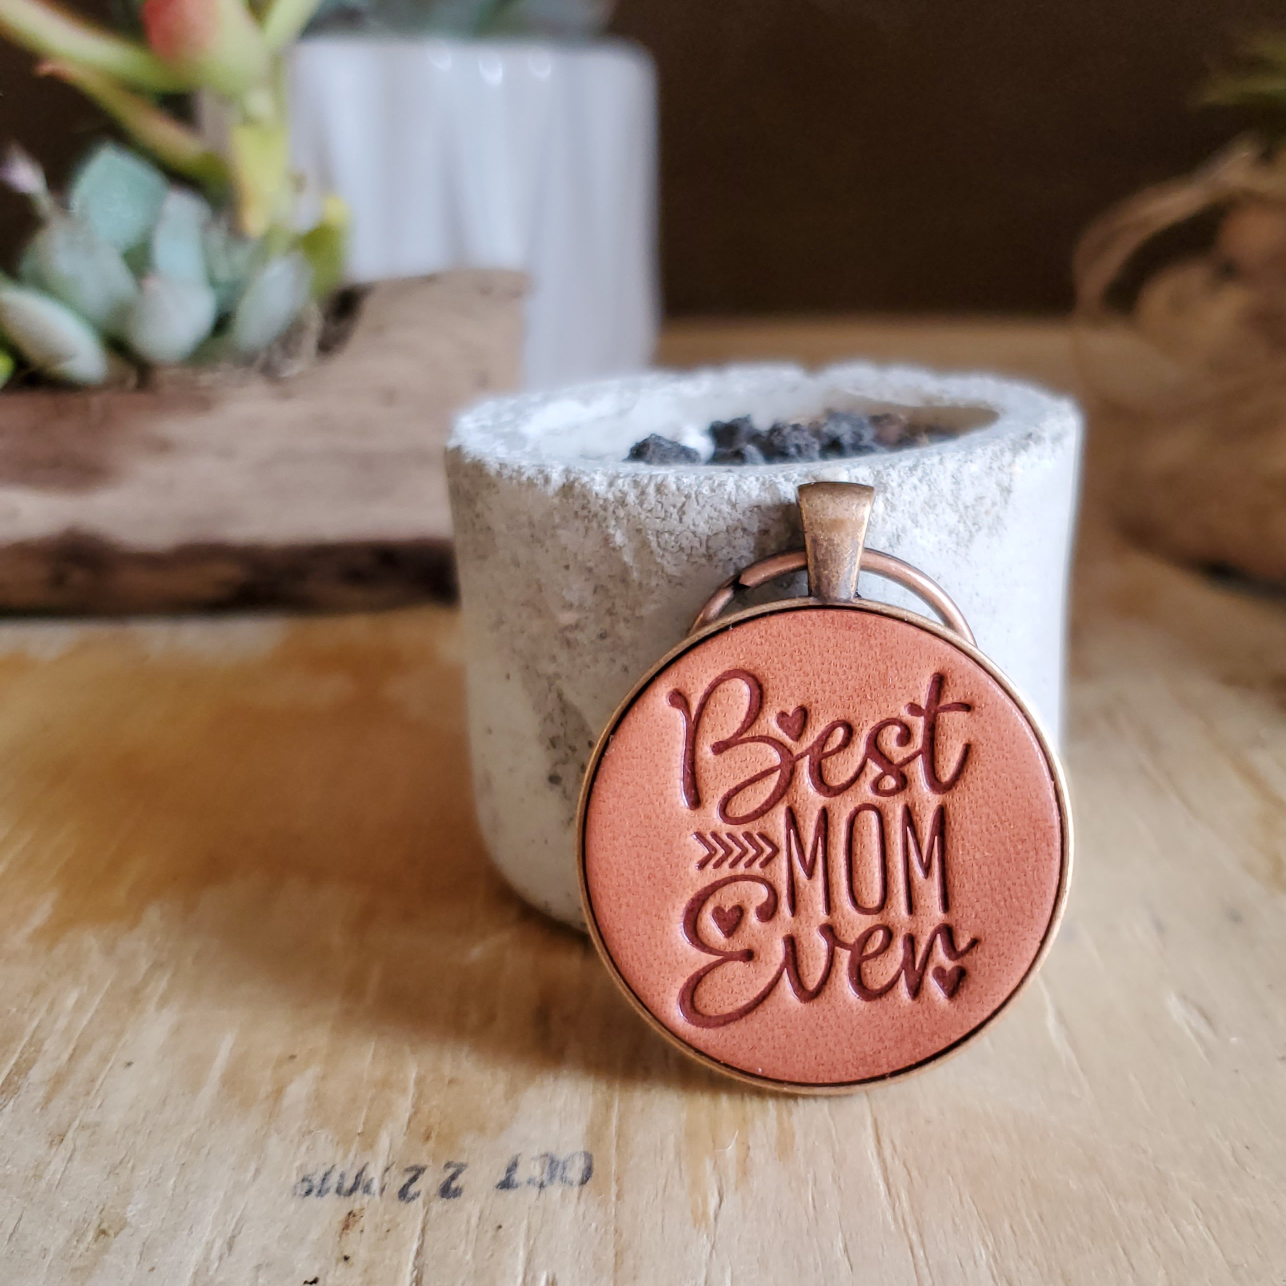 Best Mom Ever Leather Keychain - Lazy 3 Leather Company